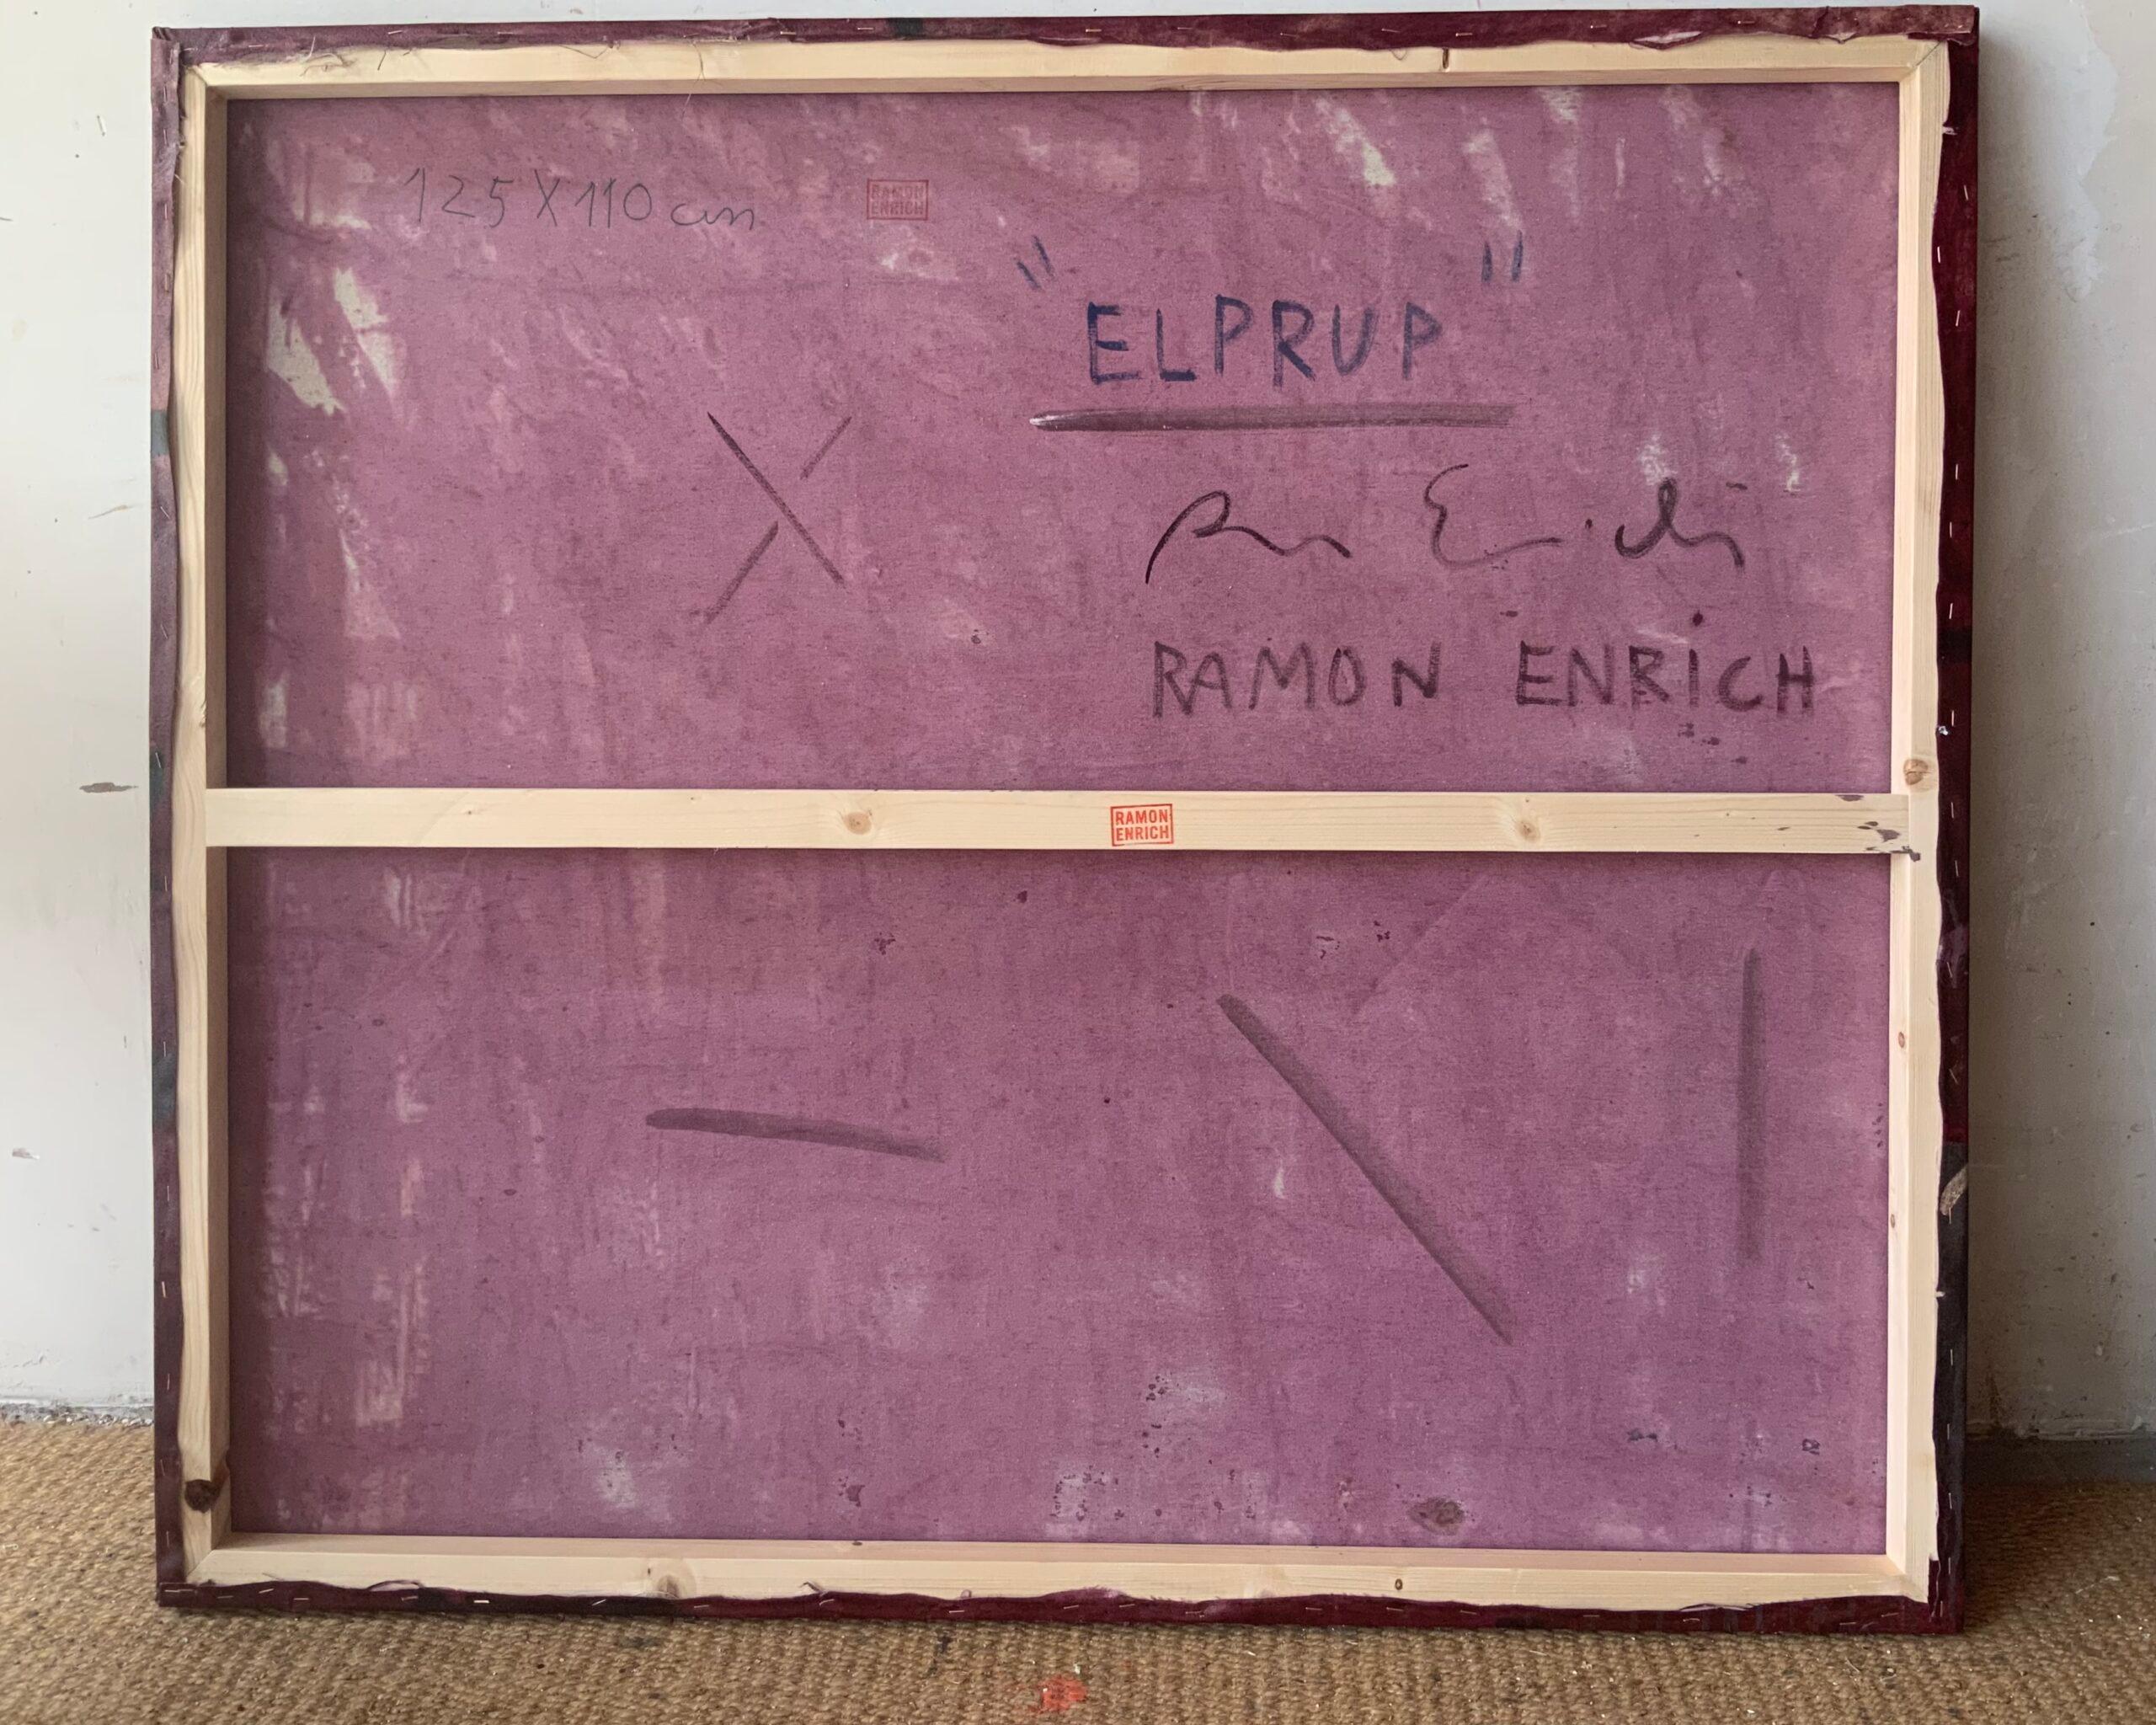 ELPRUP by Ramon Enrich - Contemporary painting, landscape, architecture, pink For Sale 5